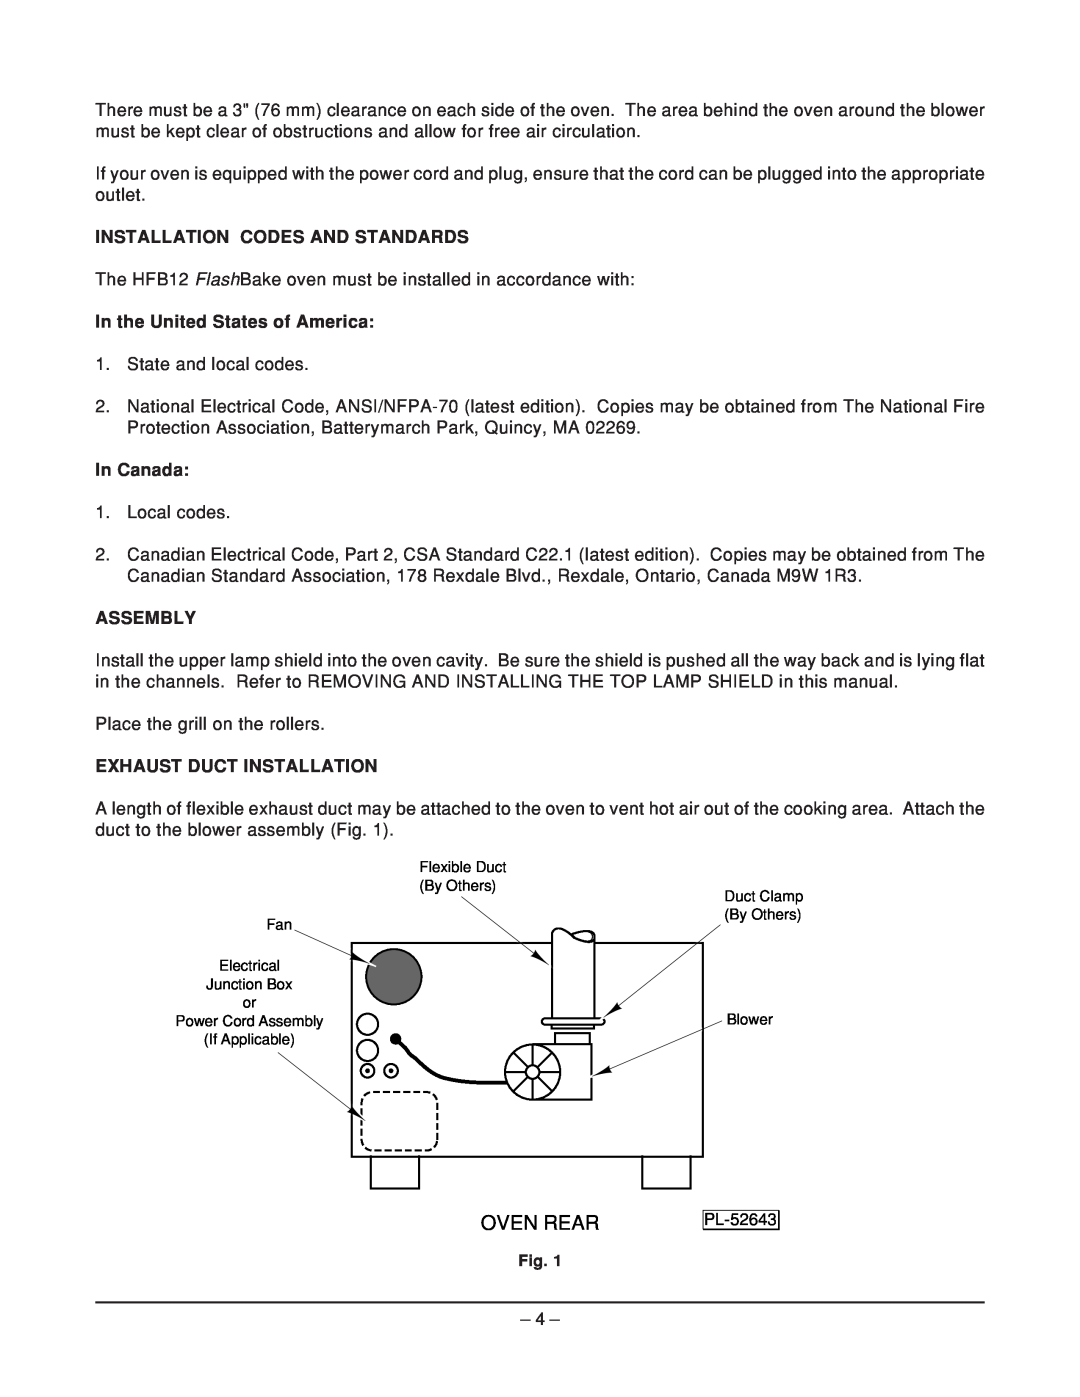 Hobart HFB12 ML-114906 Installation Codes And Standards, In the United States of America, In Canada, Assembly, Oven Rear 